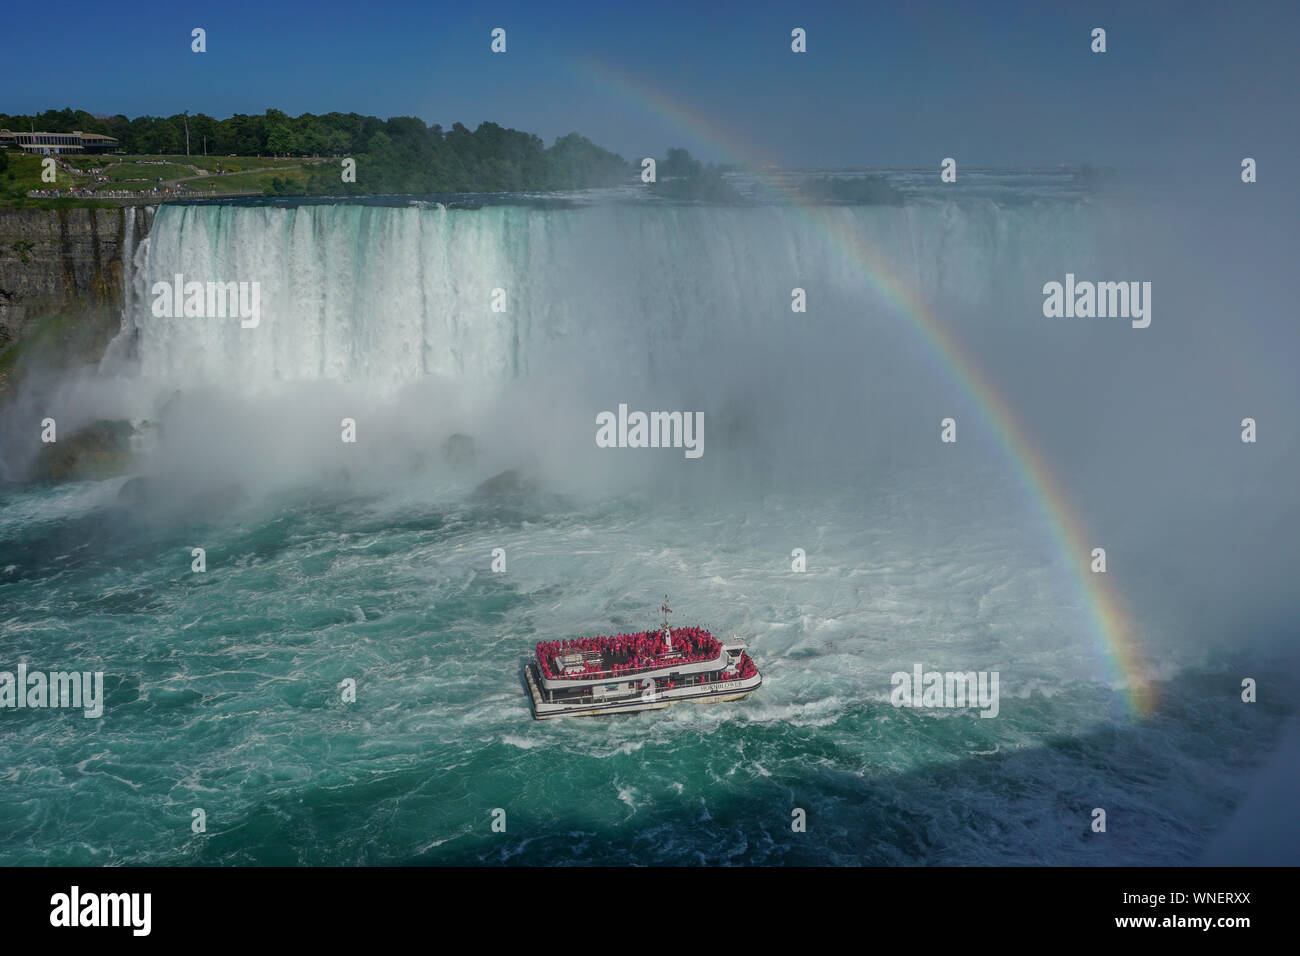 Niagara Falls, Ontario, Canada: A rainbow appears over the Niagara River as a tour boat takes visitors to the foot of the Horseshoe Falls. Stock Photo